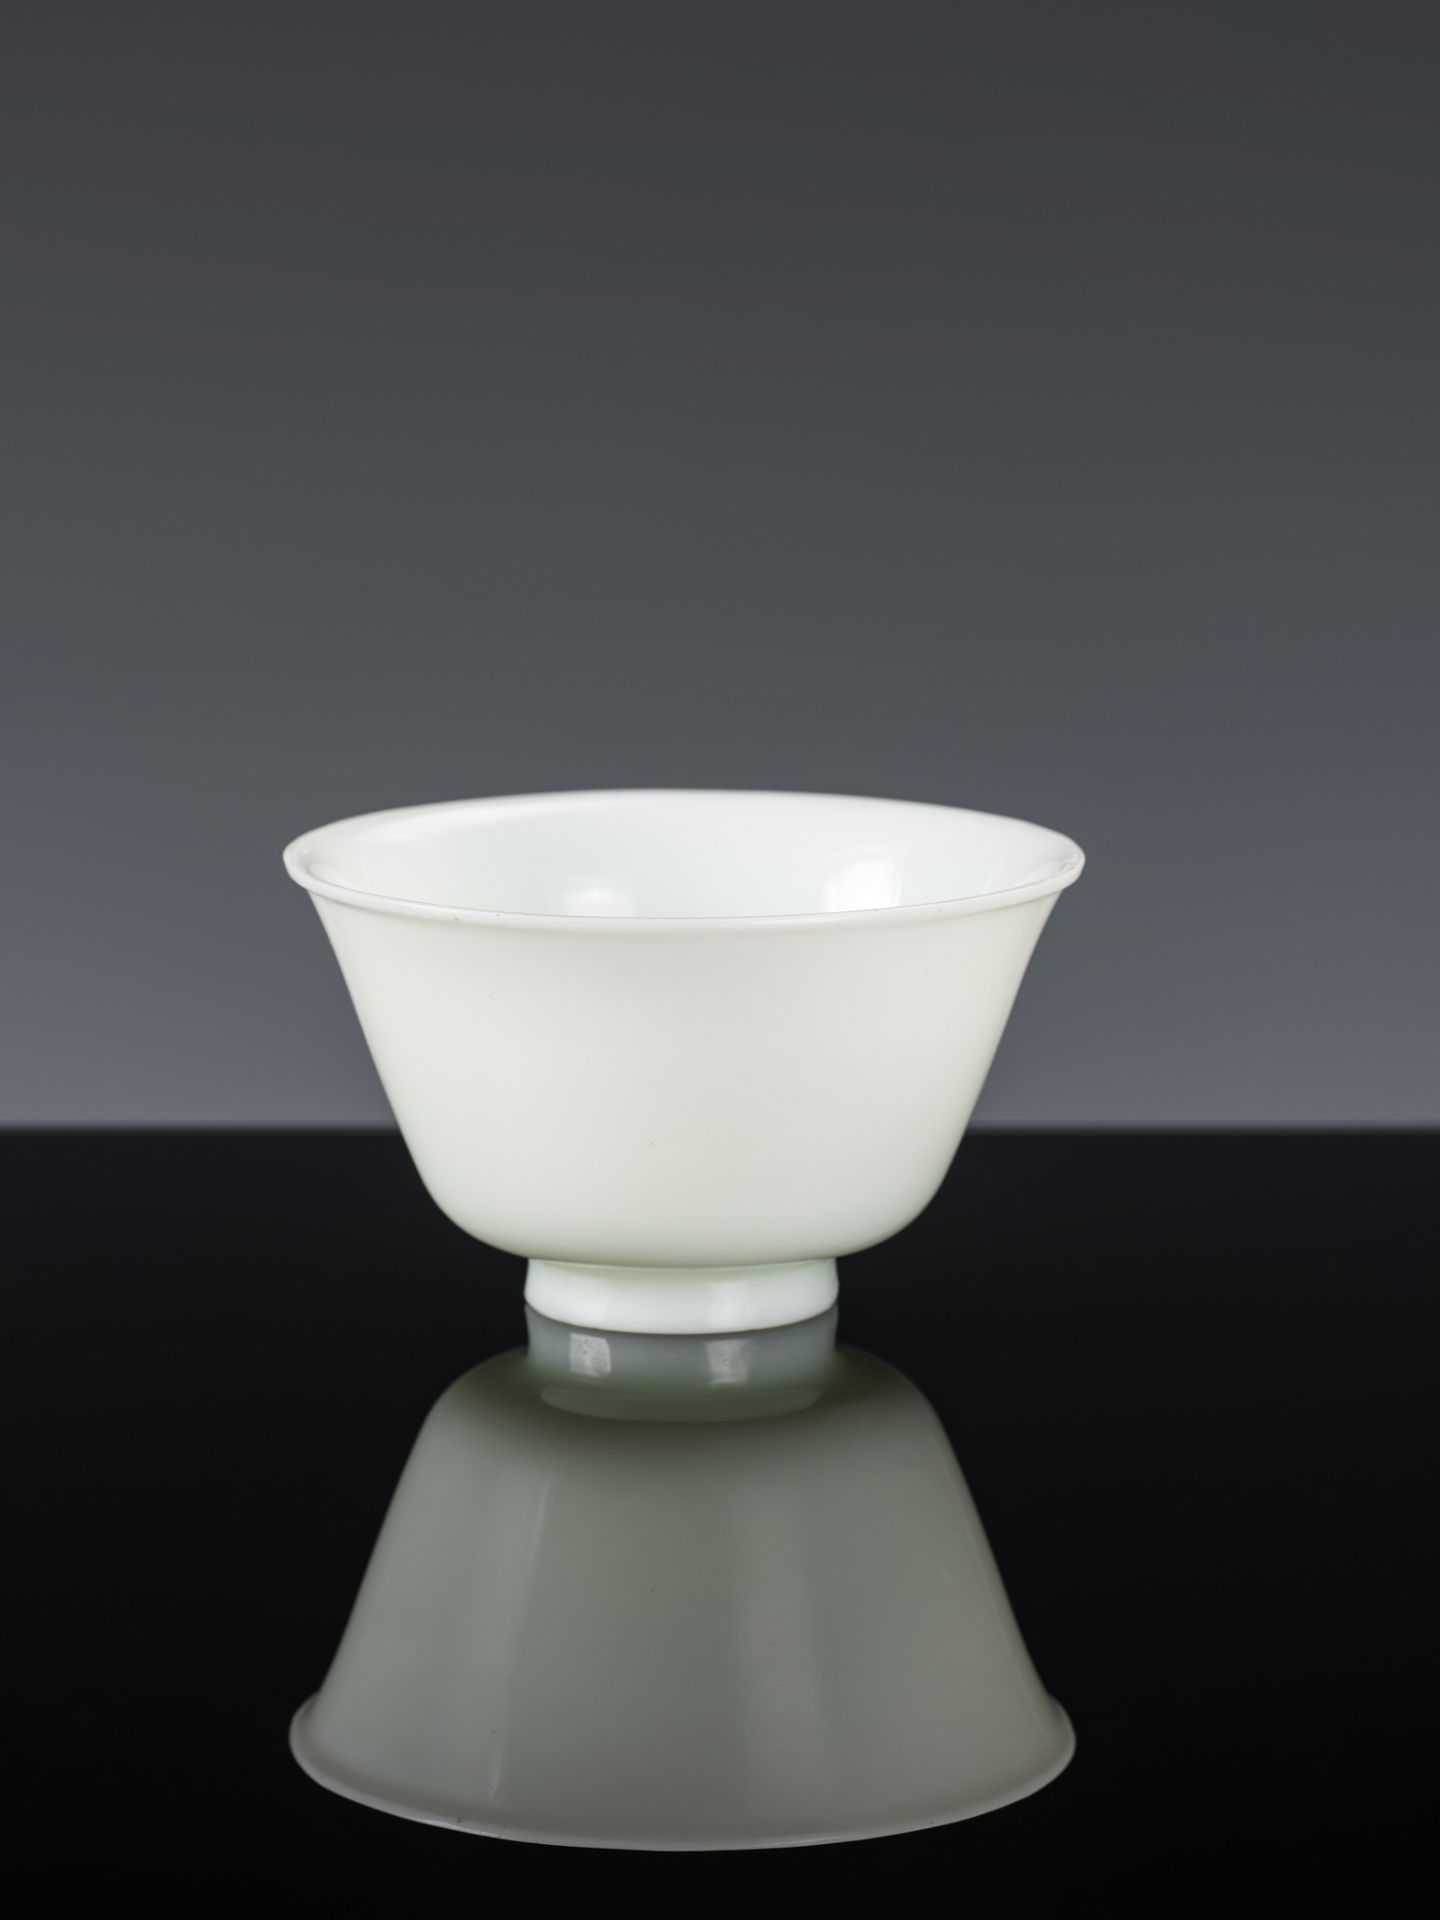 AN 'IMITATION JADE' WHITE GLASS BOWL, MID-QING DYNASTY - Image 2 of 9